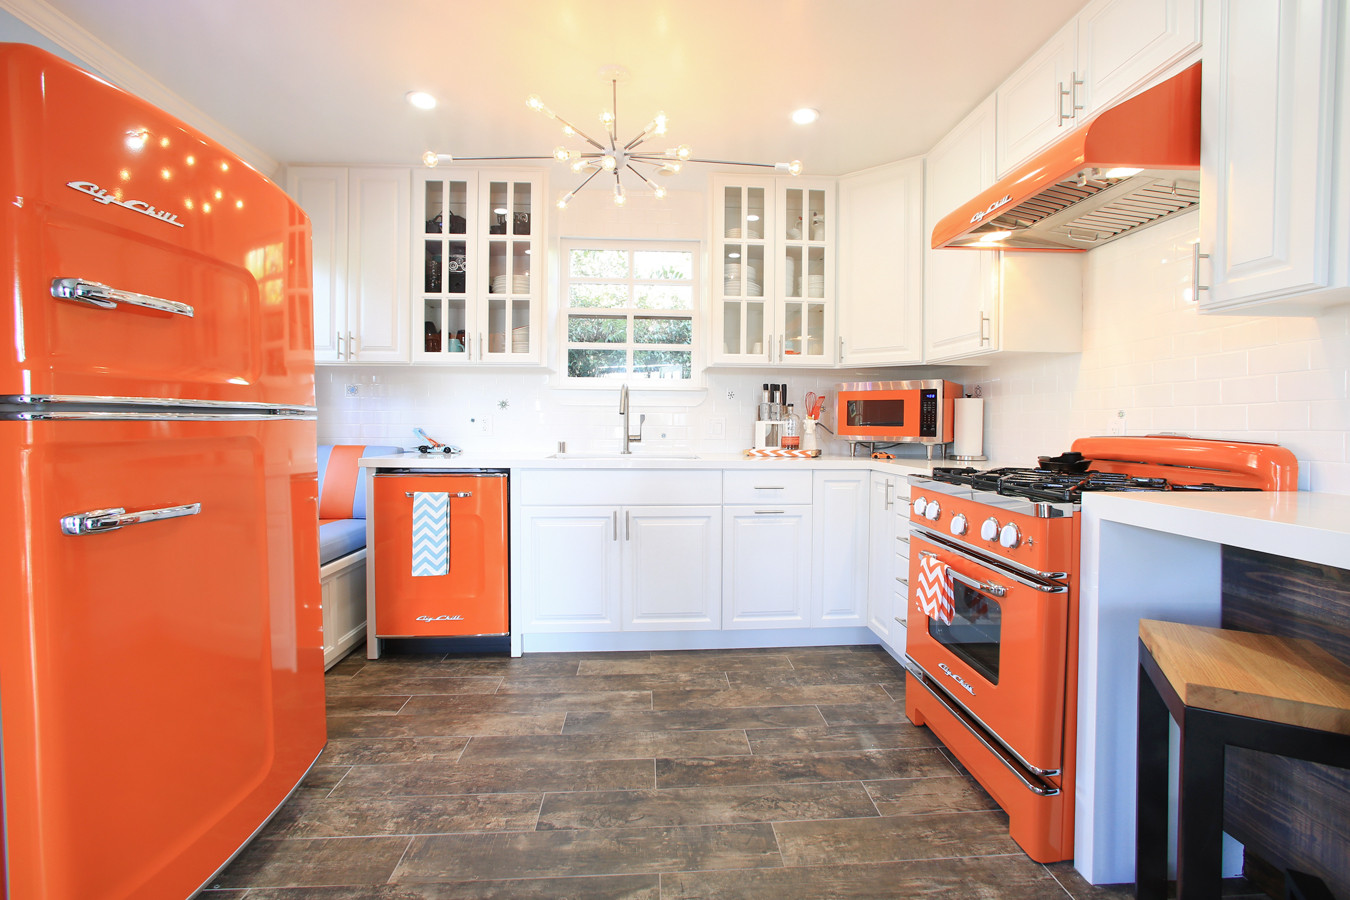 https://st.hzcdn.com/simgs/pictures/kitchens/orange-retro-kitchen-appliances-with-modern-touch-img~cce1ef7605231d02_16-1202-1-24c82eb.jpg